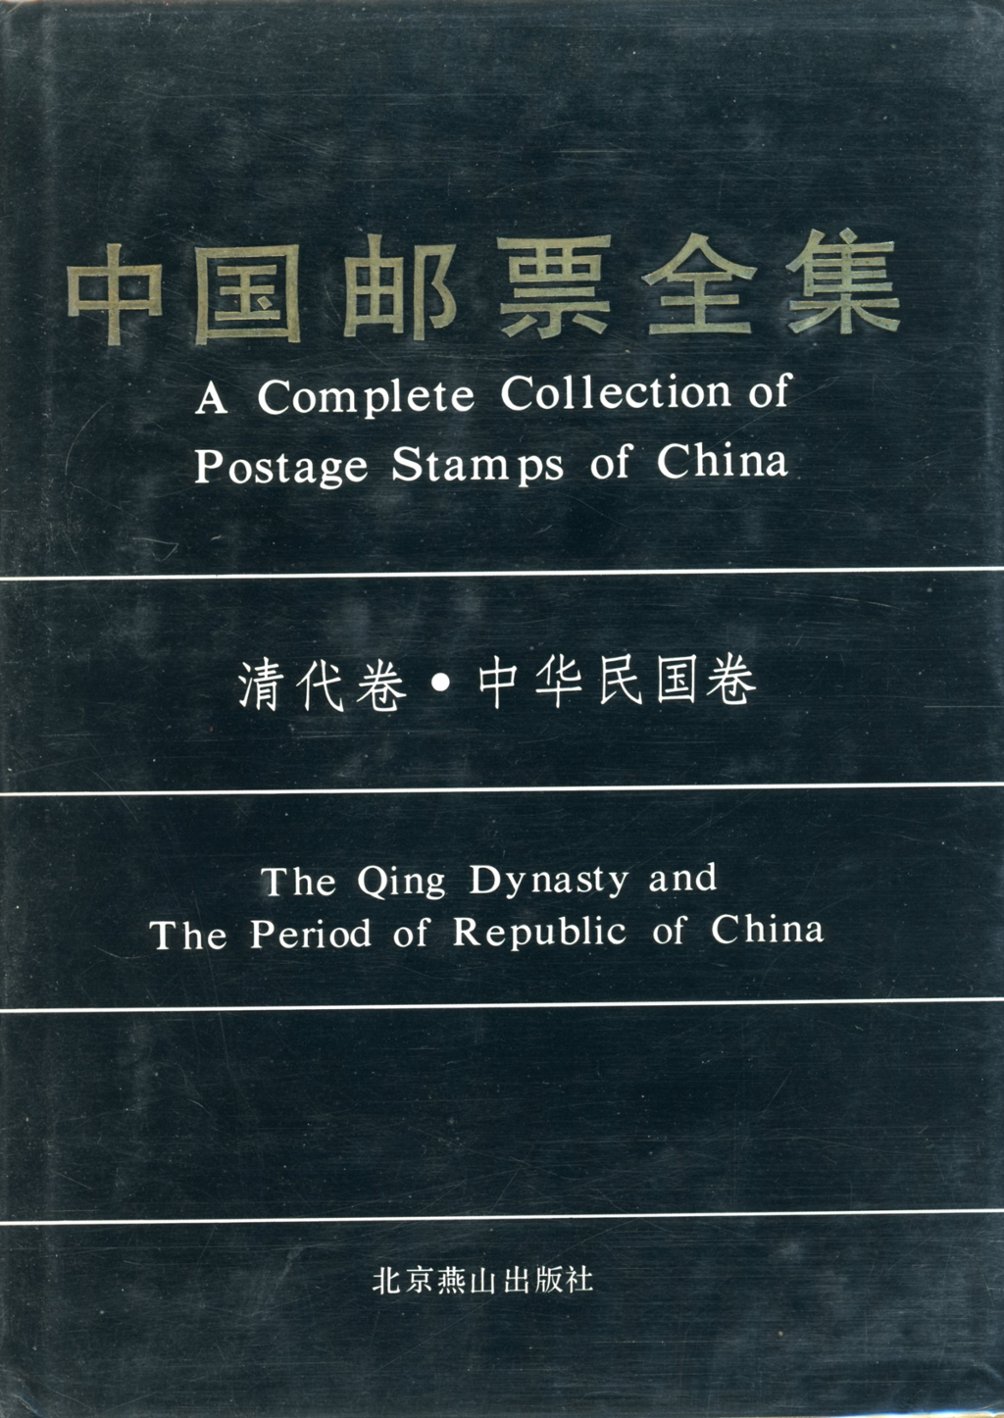 Zhongguo Jiyou Quanji: Qingdaijuan, Zhonghua Minguojuan (A Complete Collection of Postage Stamps of China: The Qing Dynasty and The Period of the Republic of China), by Wu Fenguang (1989), in Chinese and English, hardbound with dust jacket, as new (2 lb)